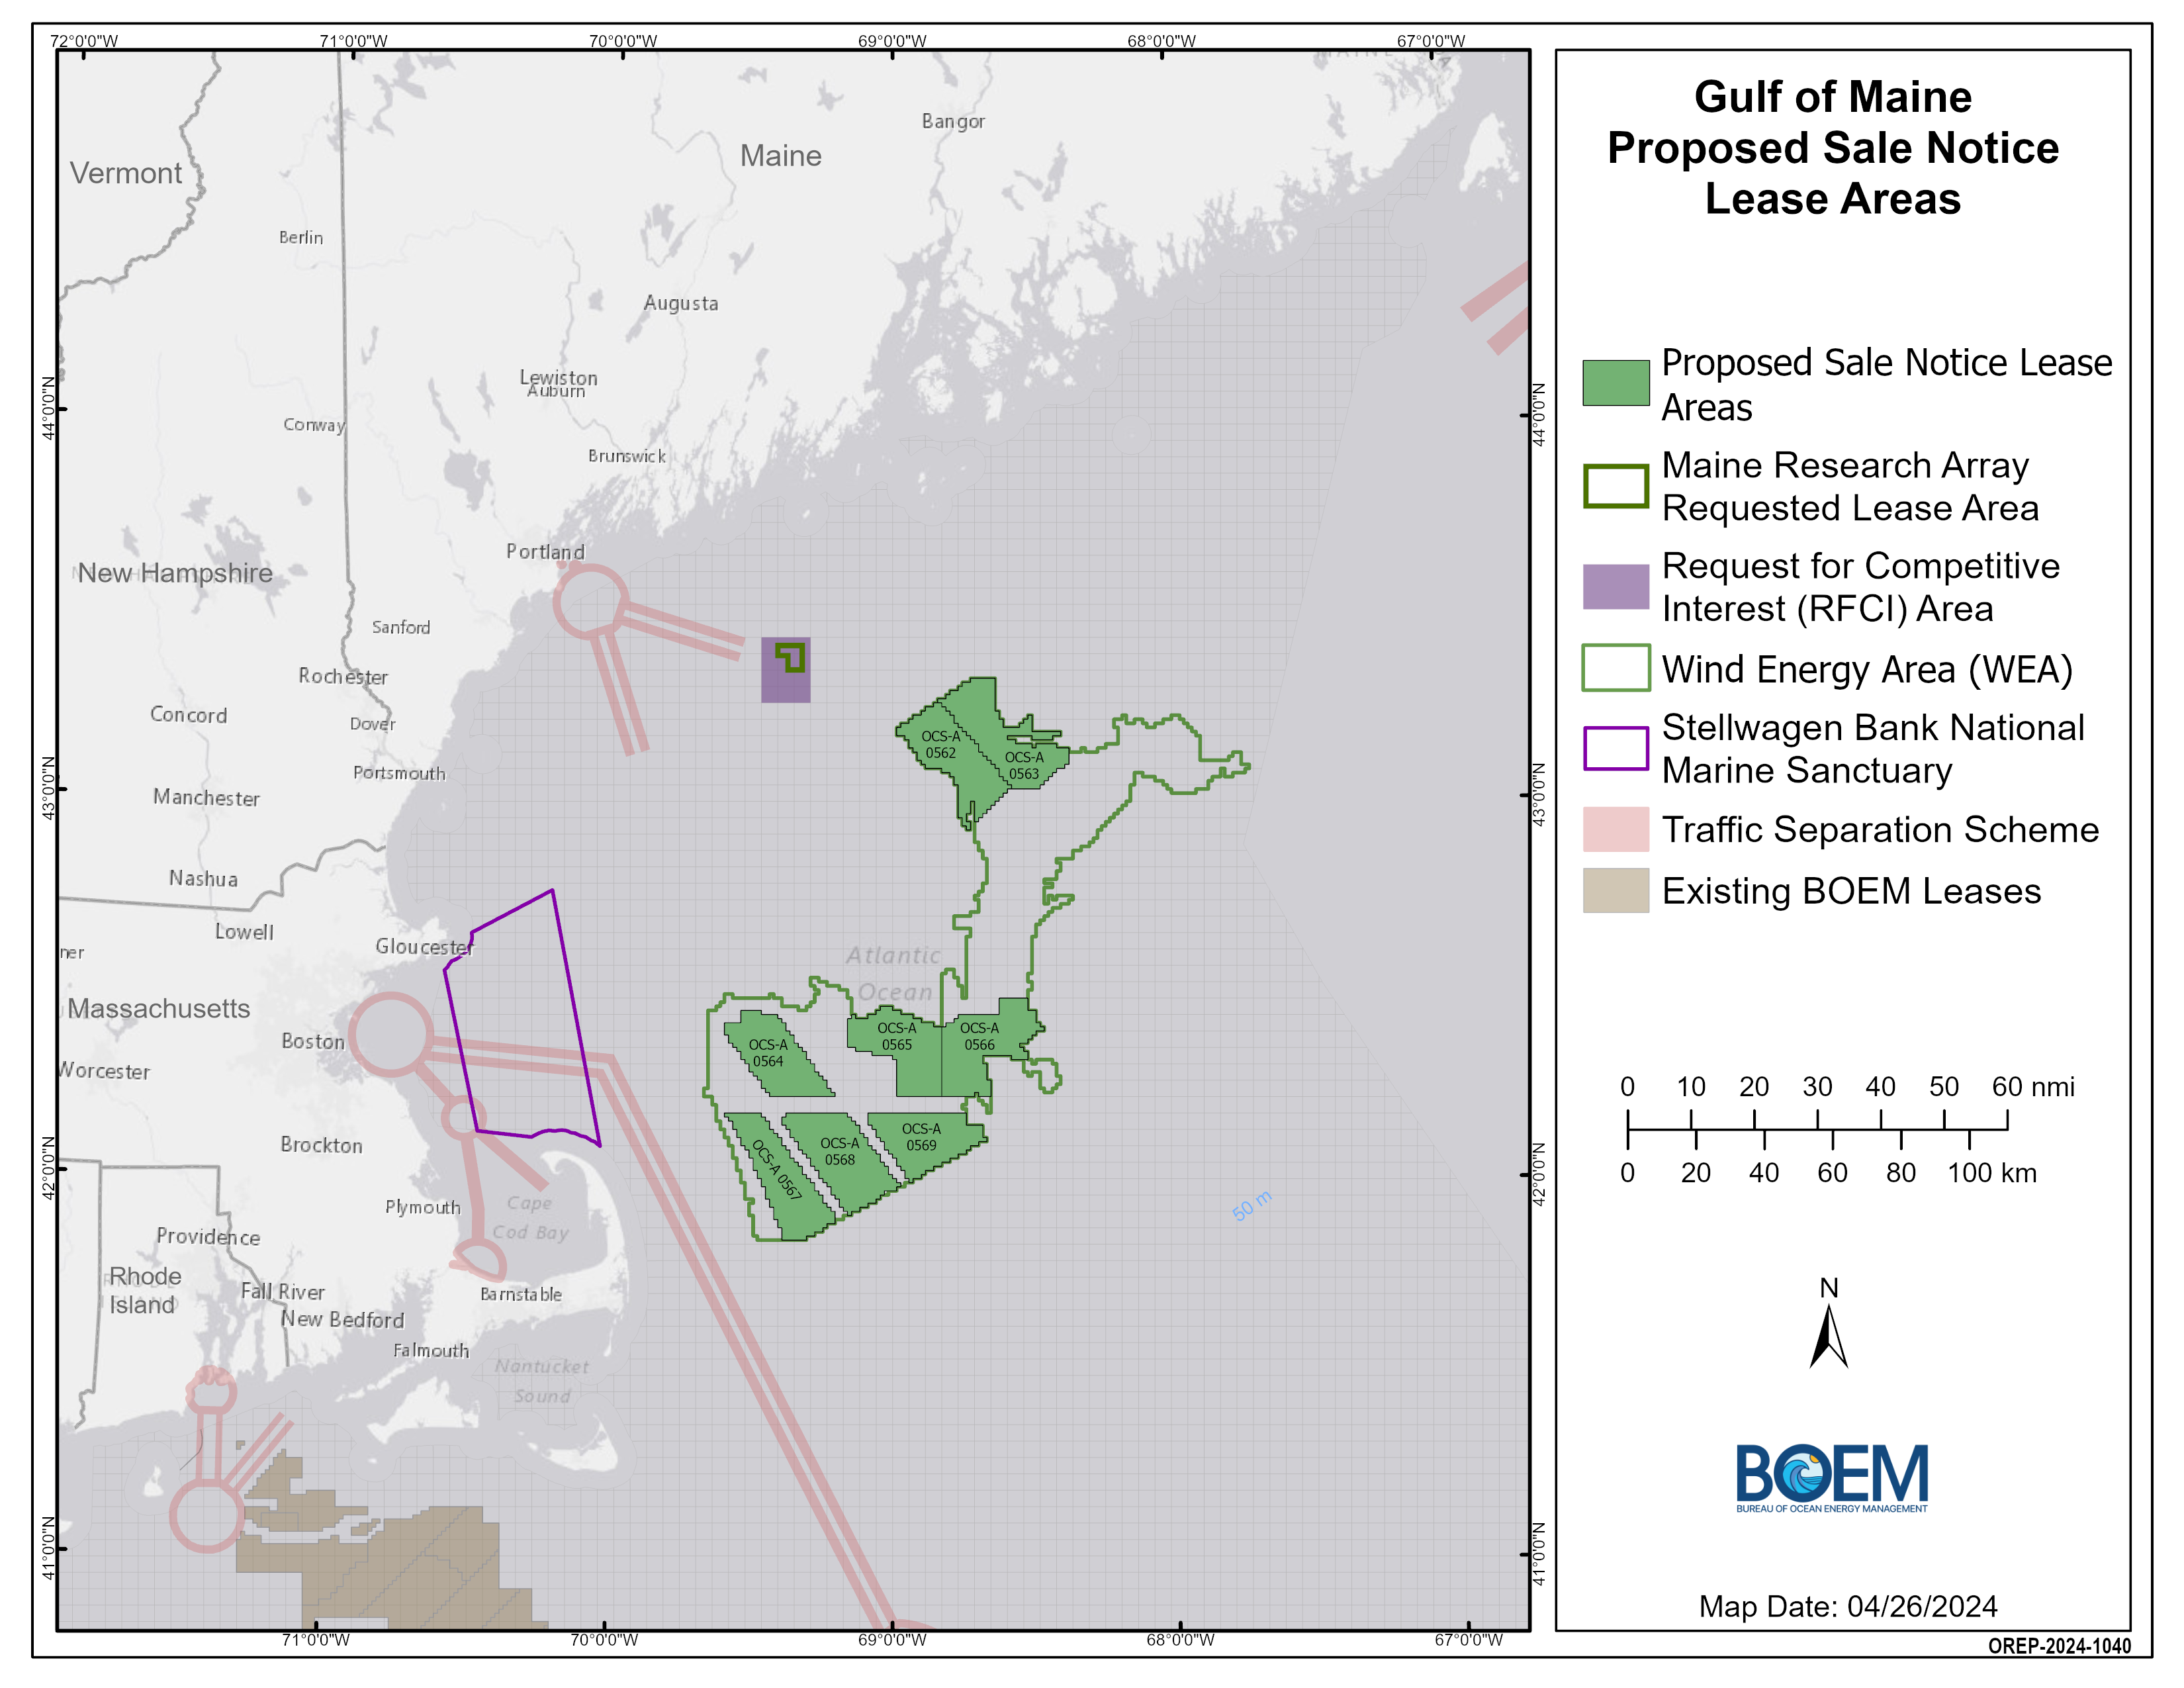 Gulf of Maine Proposed Sale Notice Lease Areas